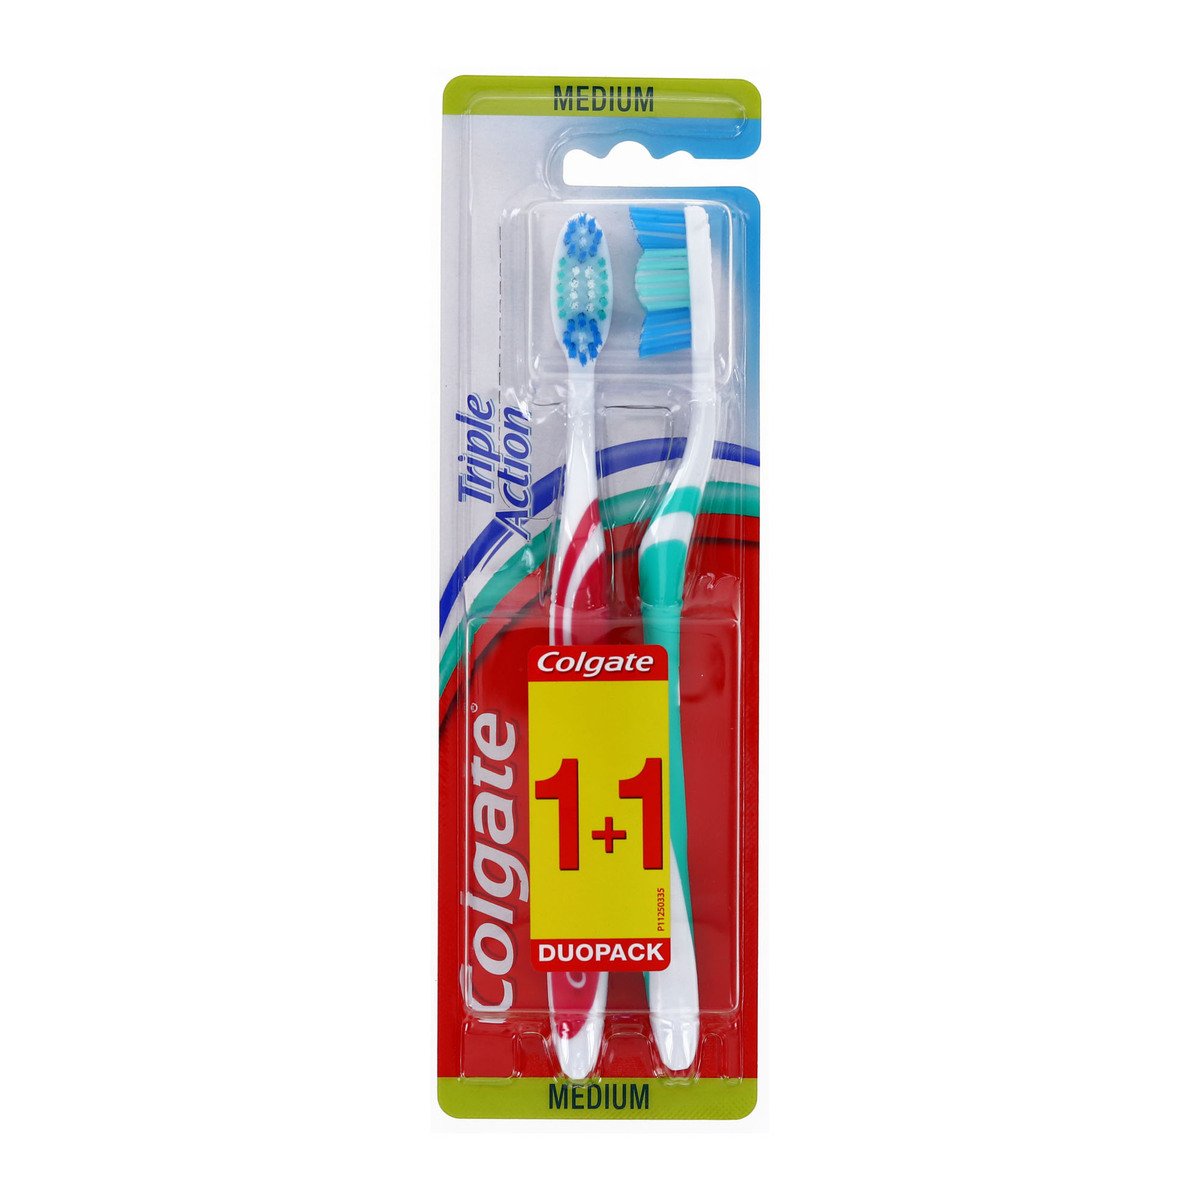 Colgate Toothbrush Triple Action Medium Assorted Colours 1+1